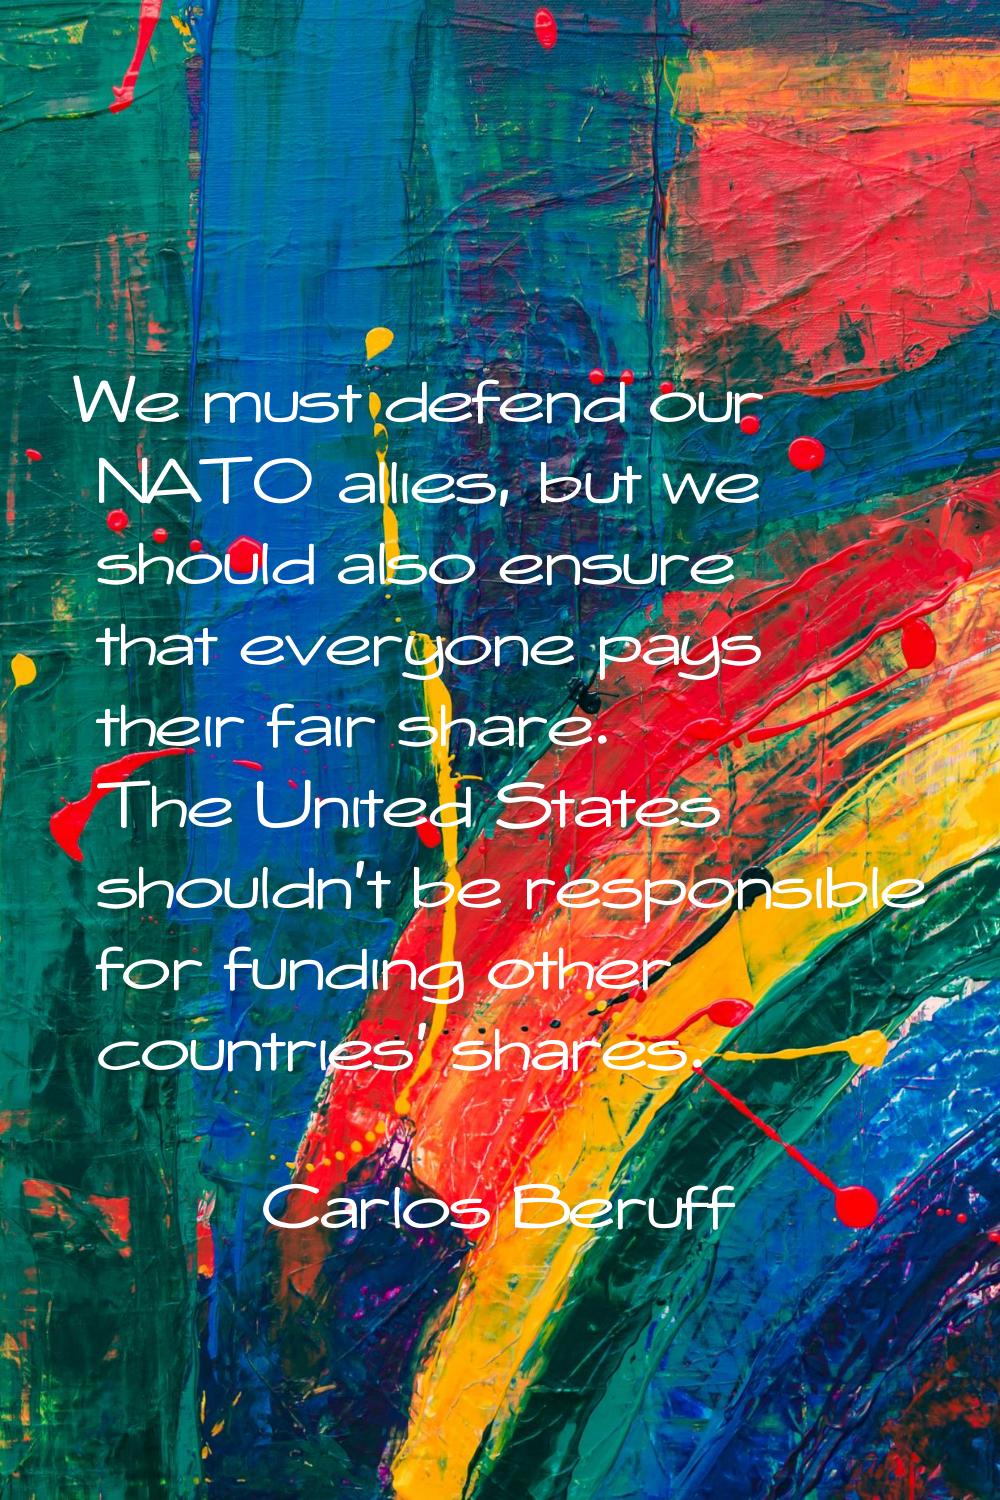 We must defend our NATO allies, but we should also ensure that everyone pays their fair share. The 